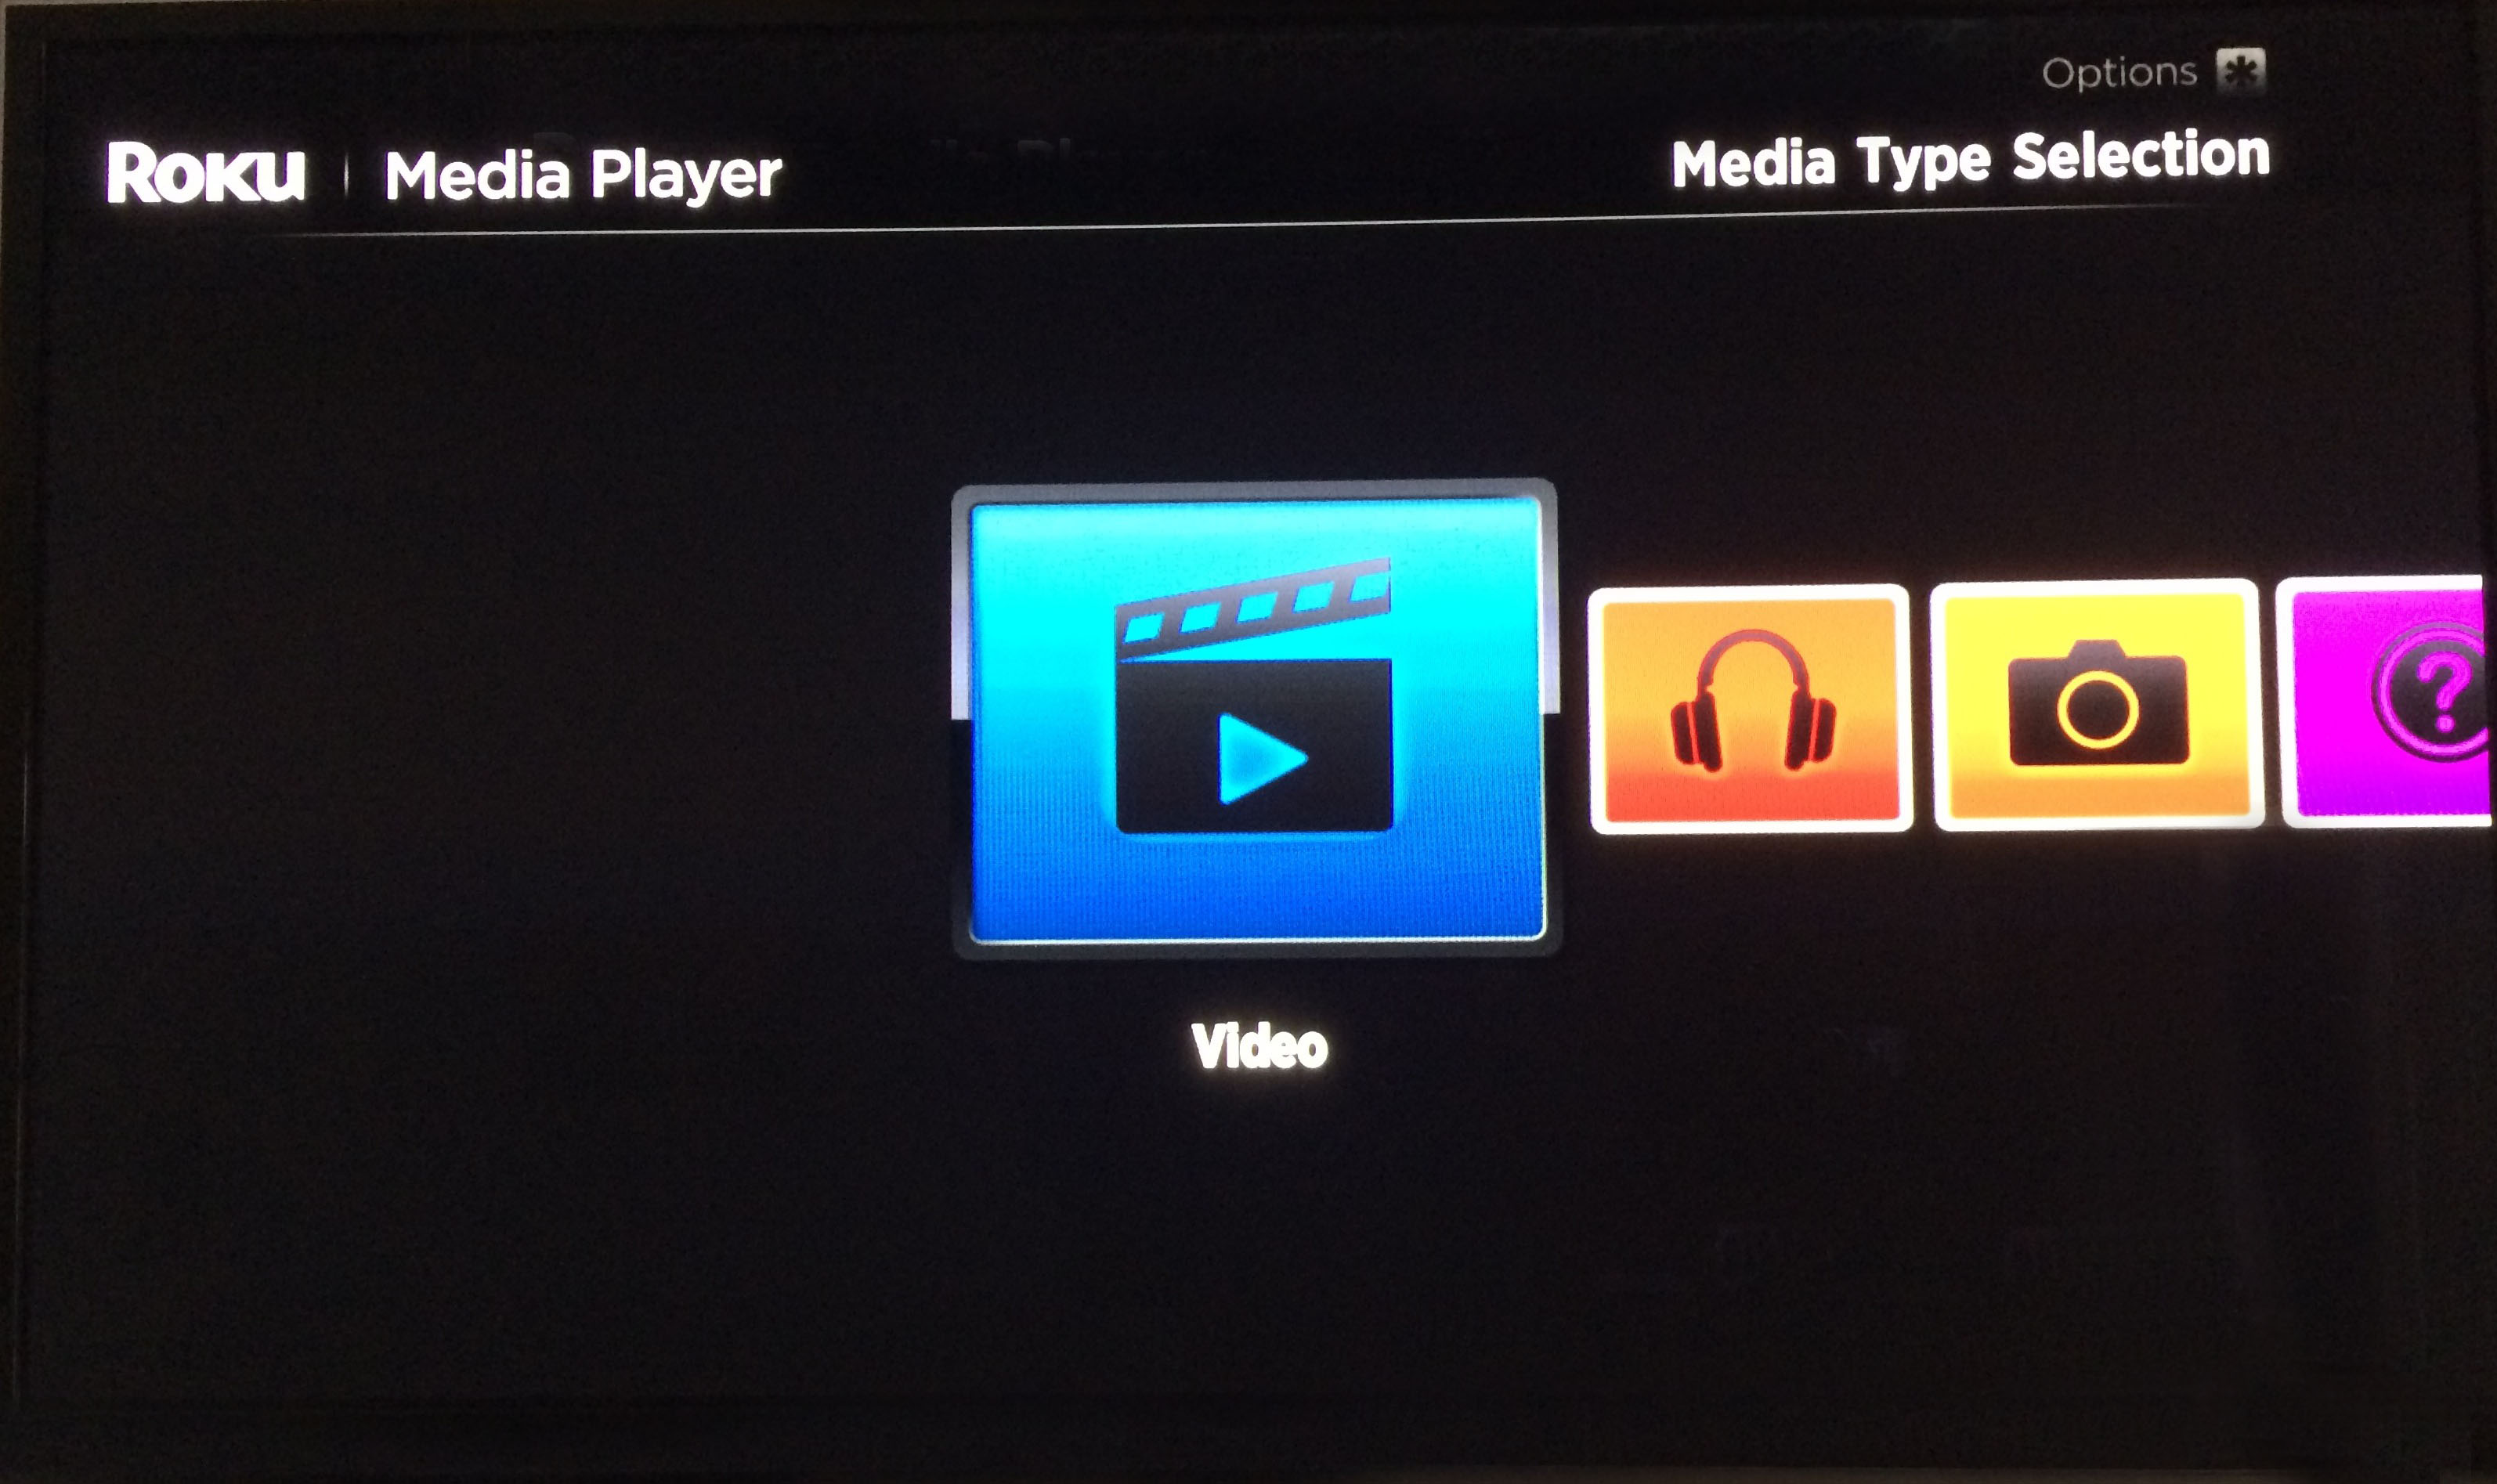 Select video from Media Player channel